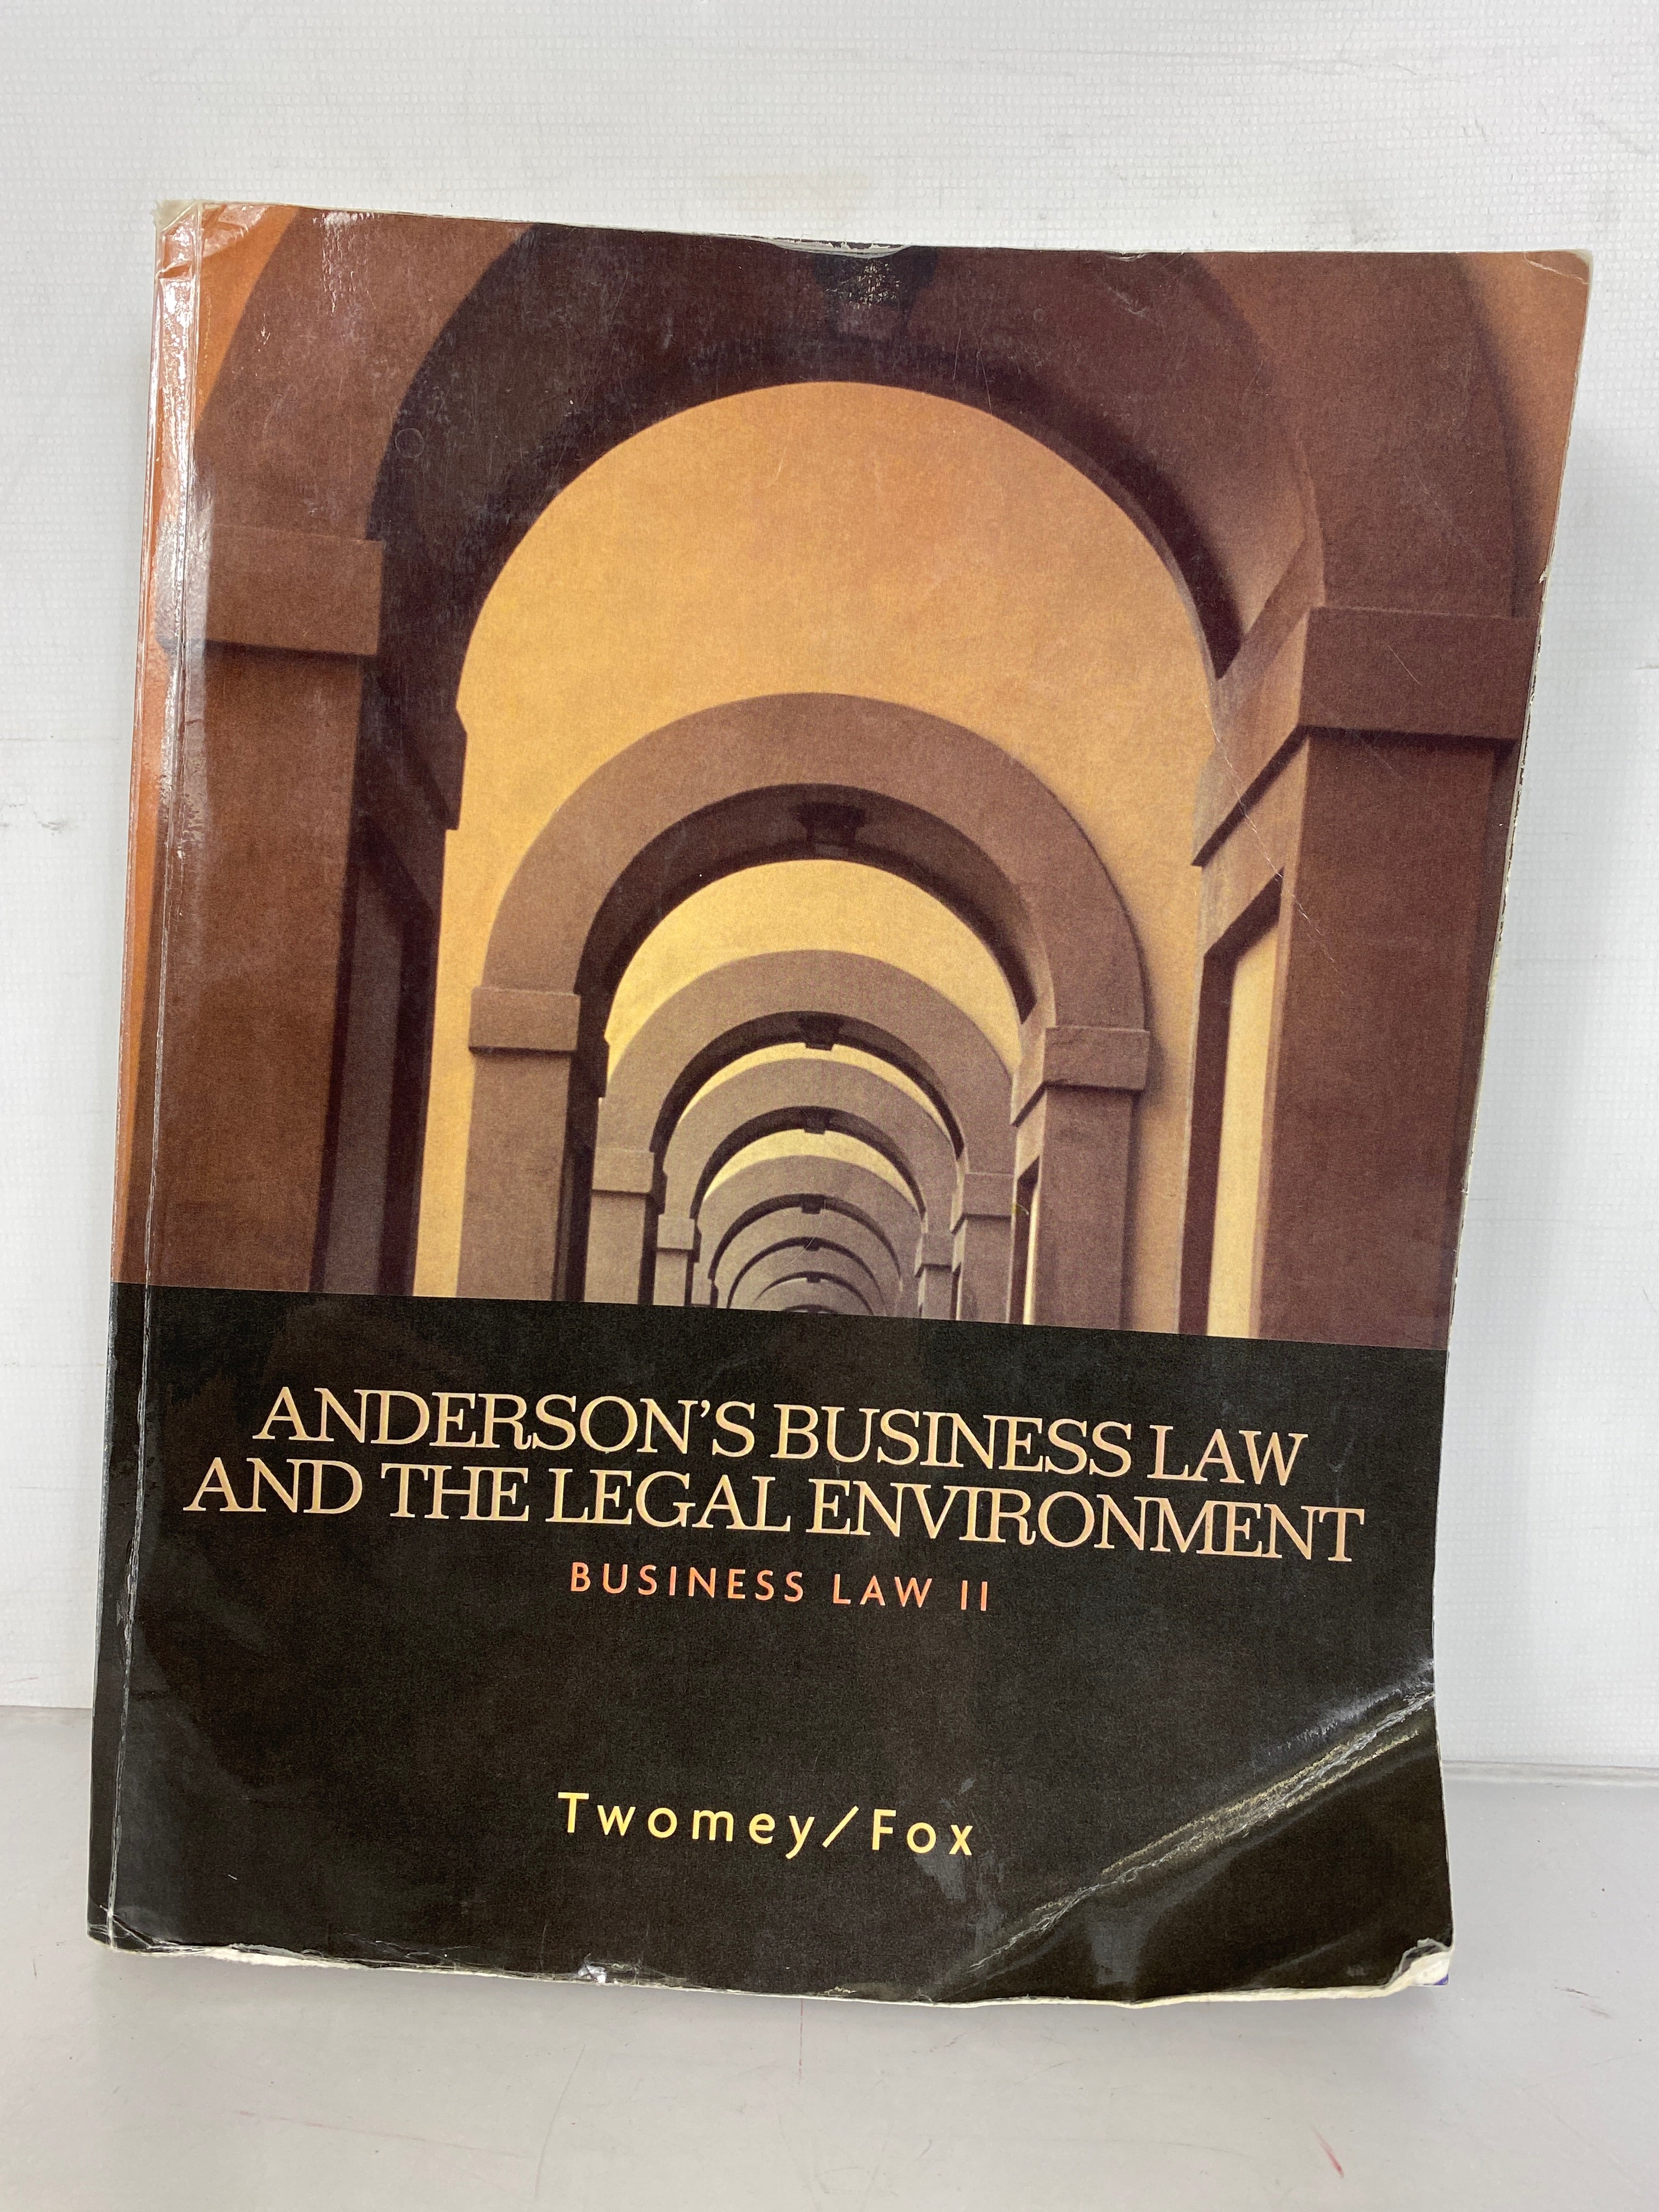 Anderson's Business Law and the Legal Environment Business Law II by Twomey and Fox 2008 SC